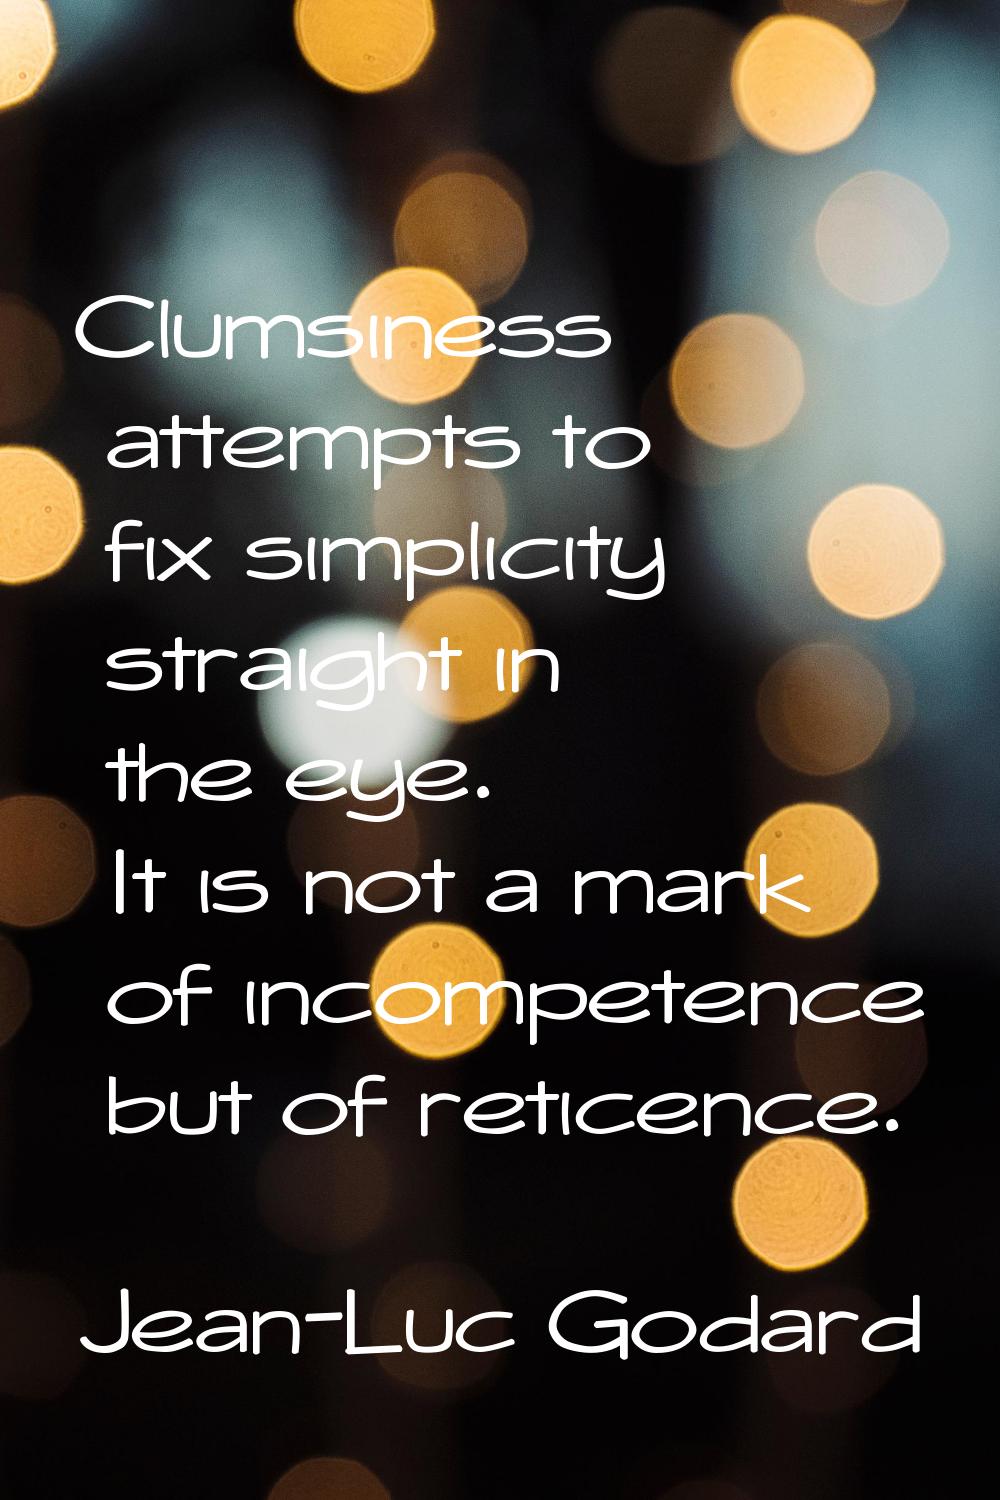 Clumsiness attempts to fix simplicity straight in the eye. It is not a mark of incompetence but of 